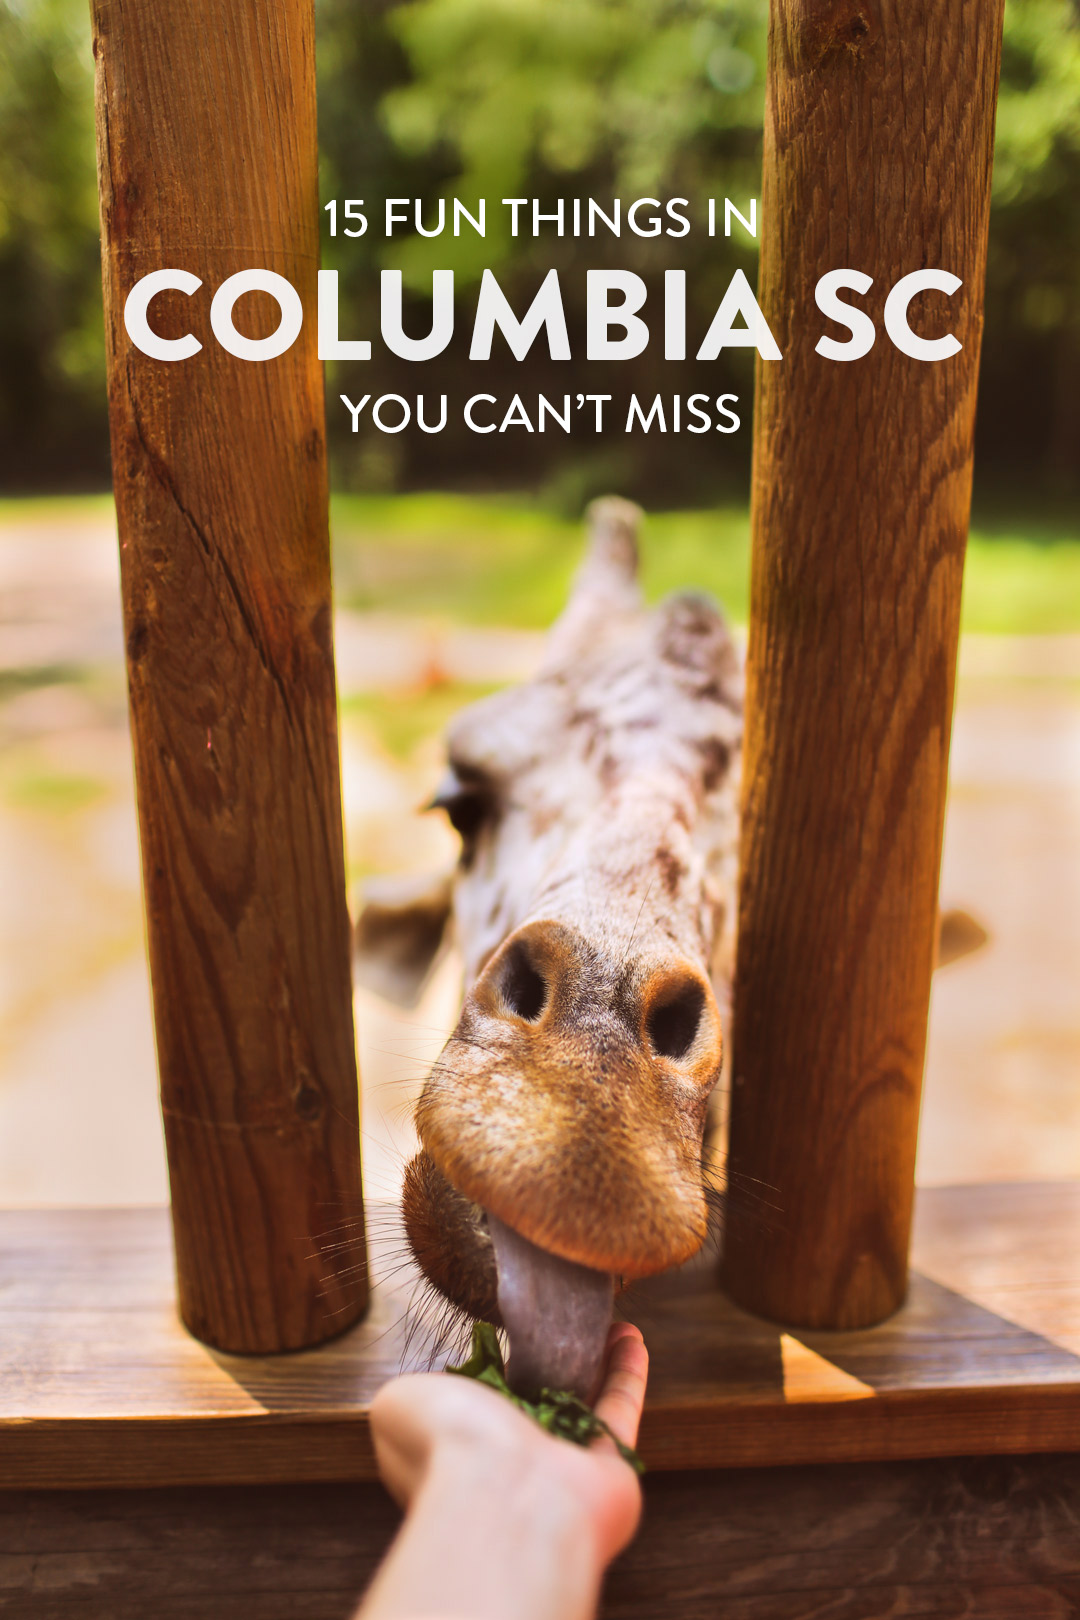 Visiting Columbia SC? Here are 15 fun things to do in Columbia SC that you can't miss. Save this pin and click to see more Columbia SC Attractions, things to do with kids in Columbia SC, free things to do in Columbia SC and more // Local Adventurer #RealColumbiaSC #columbiasc #discoverSC #southcarolina #visittheusa #usa